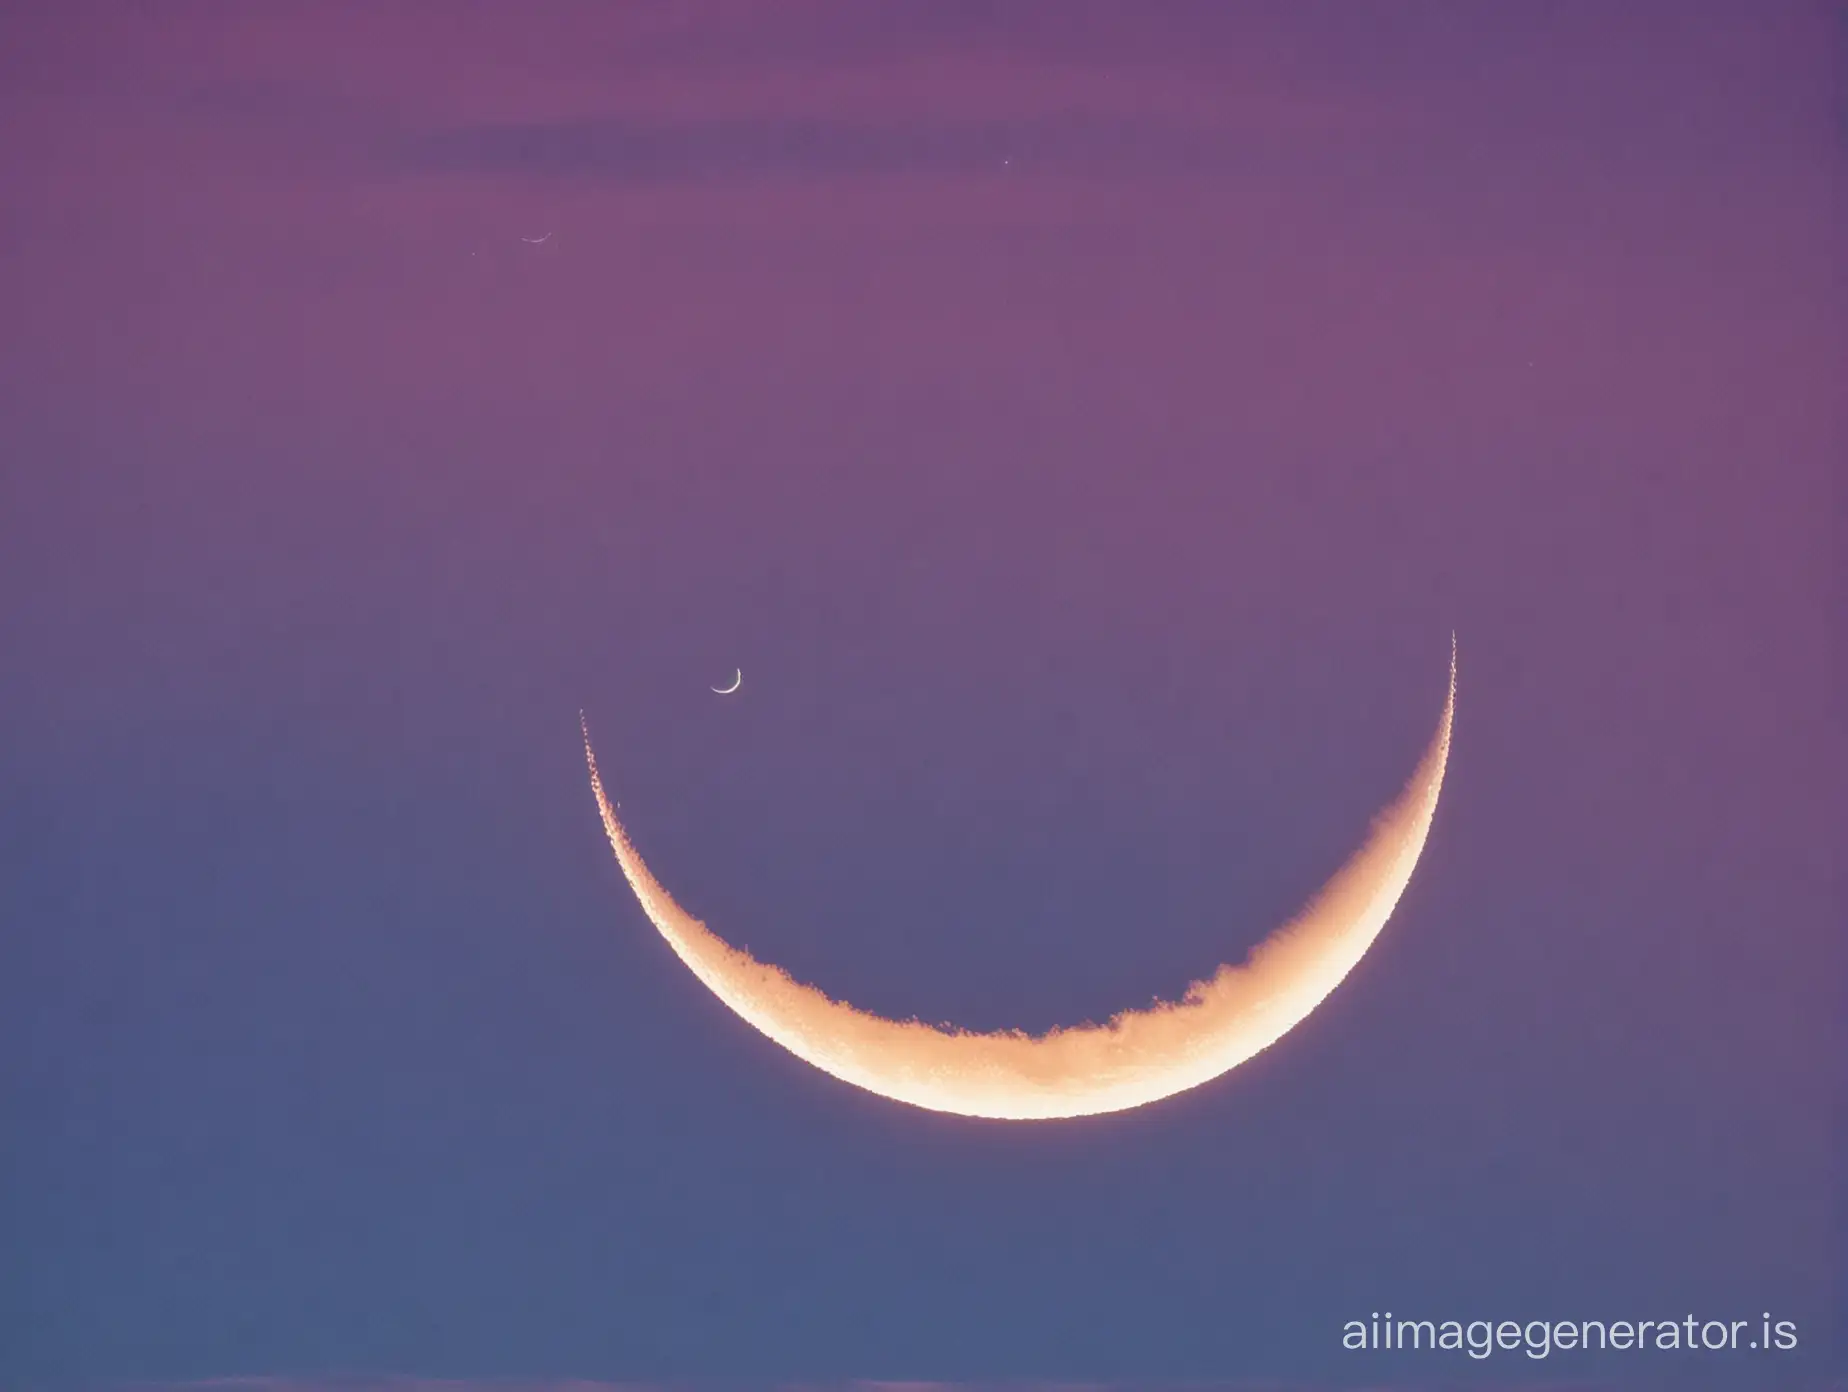 Scenic-View-of-a-Beautiful-Crescent-Moon-in-the-Evening-Sky